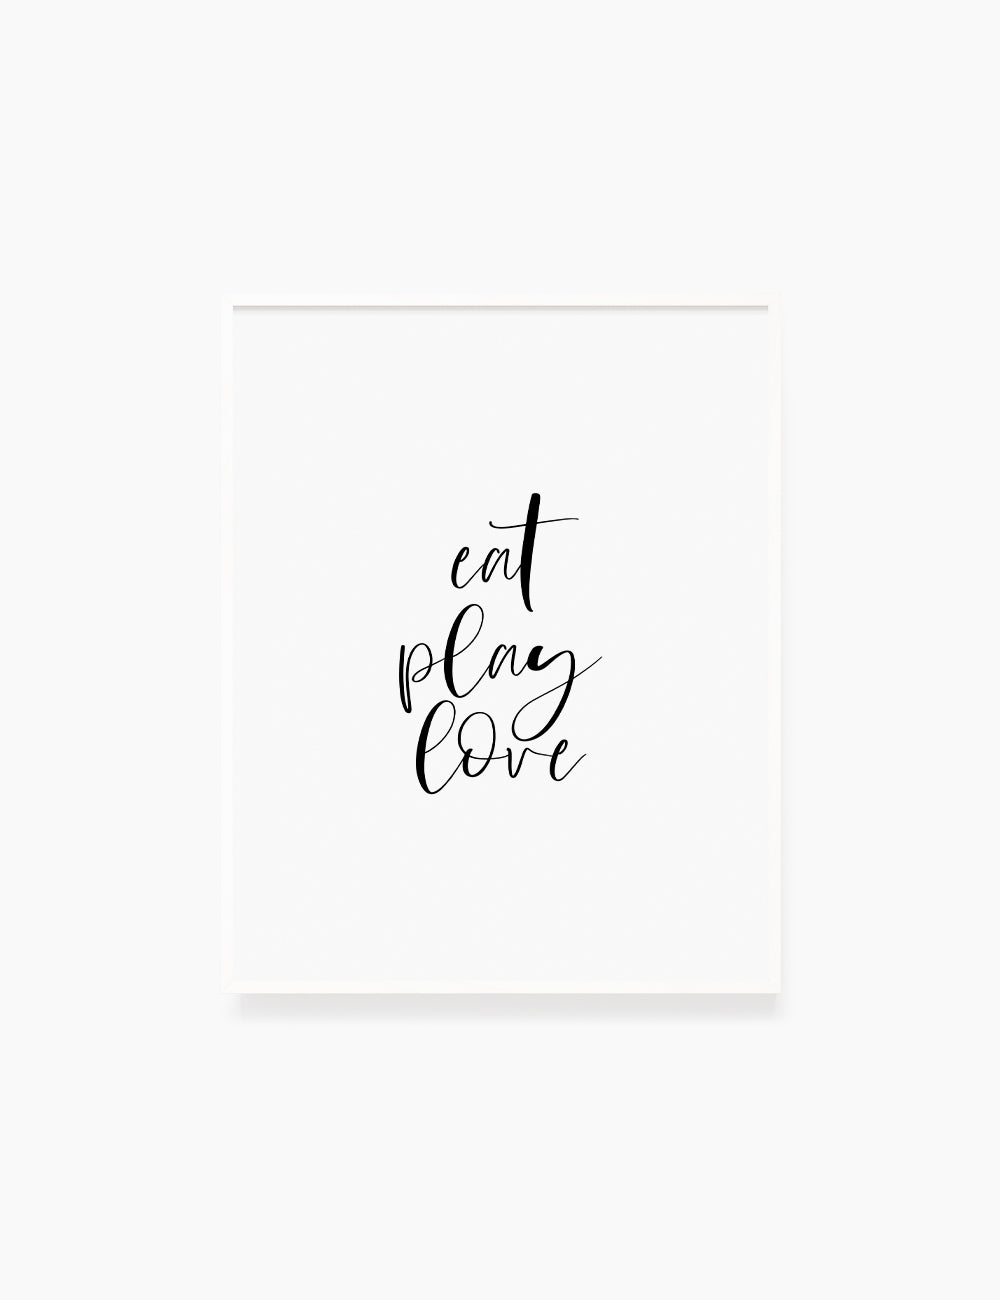 Printable Wall Art Quote: EAT. PLAY. LOVE. Printable Poster. Inspirational Quote. Motivational Quote. WA024 - Paper Moon Art & Design